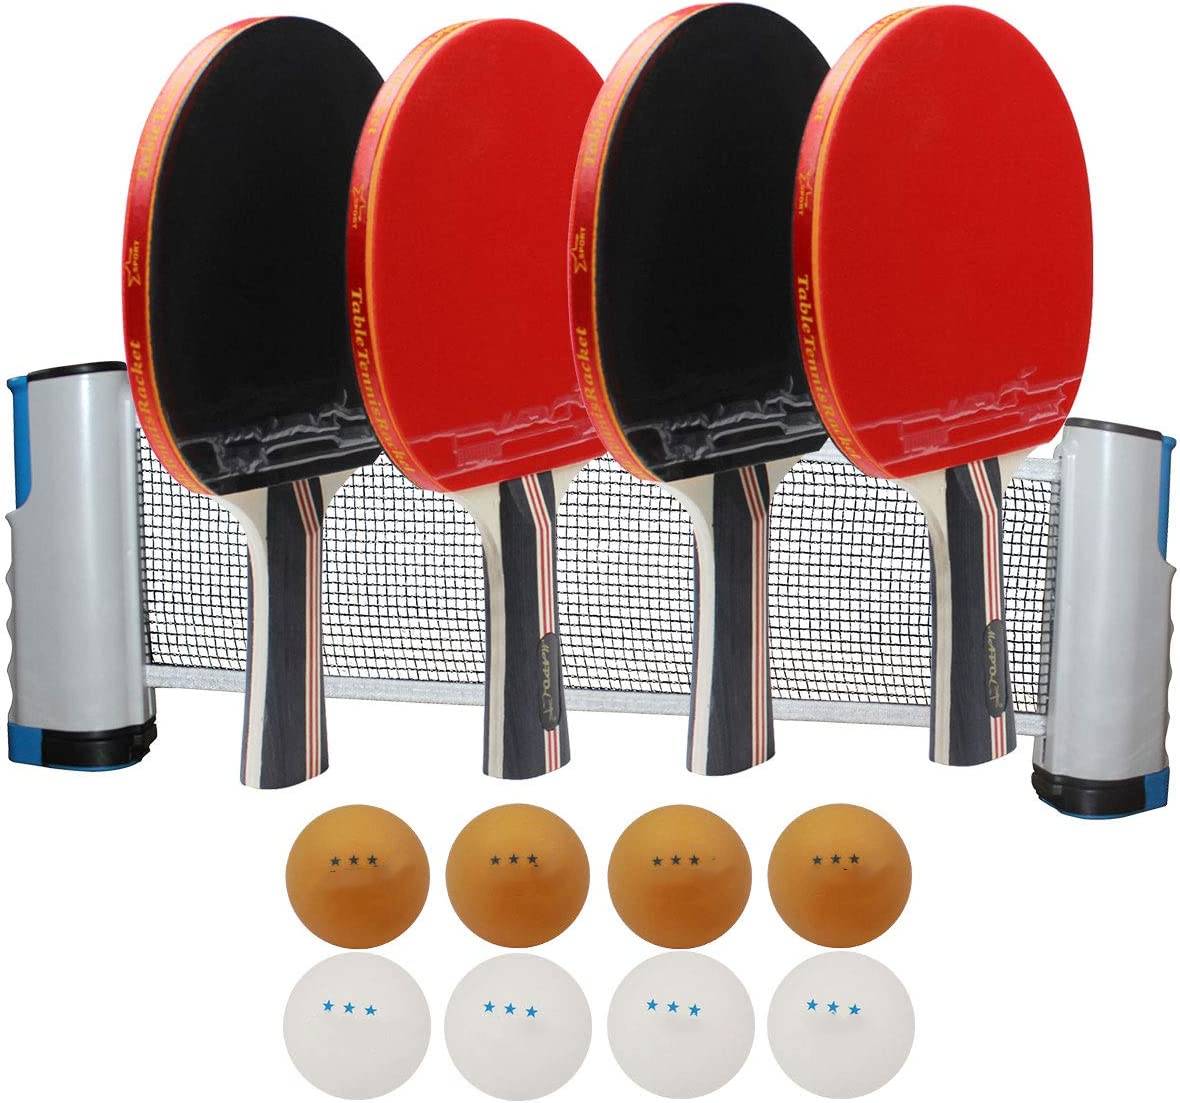 The best ping pong paddle set 0636, Portable Table Tennis Set with Retractable Net, Perfect for Professional Play and Amateurs